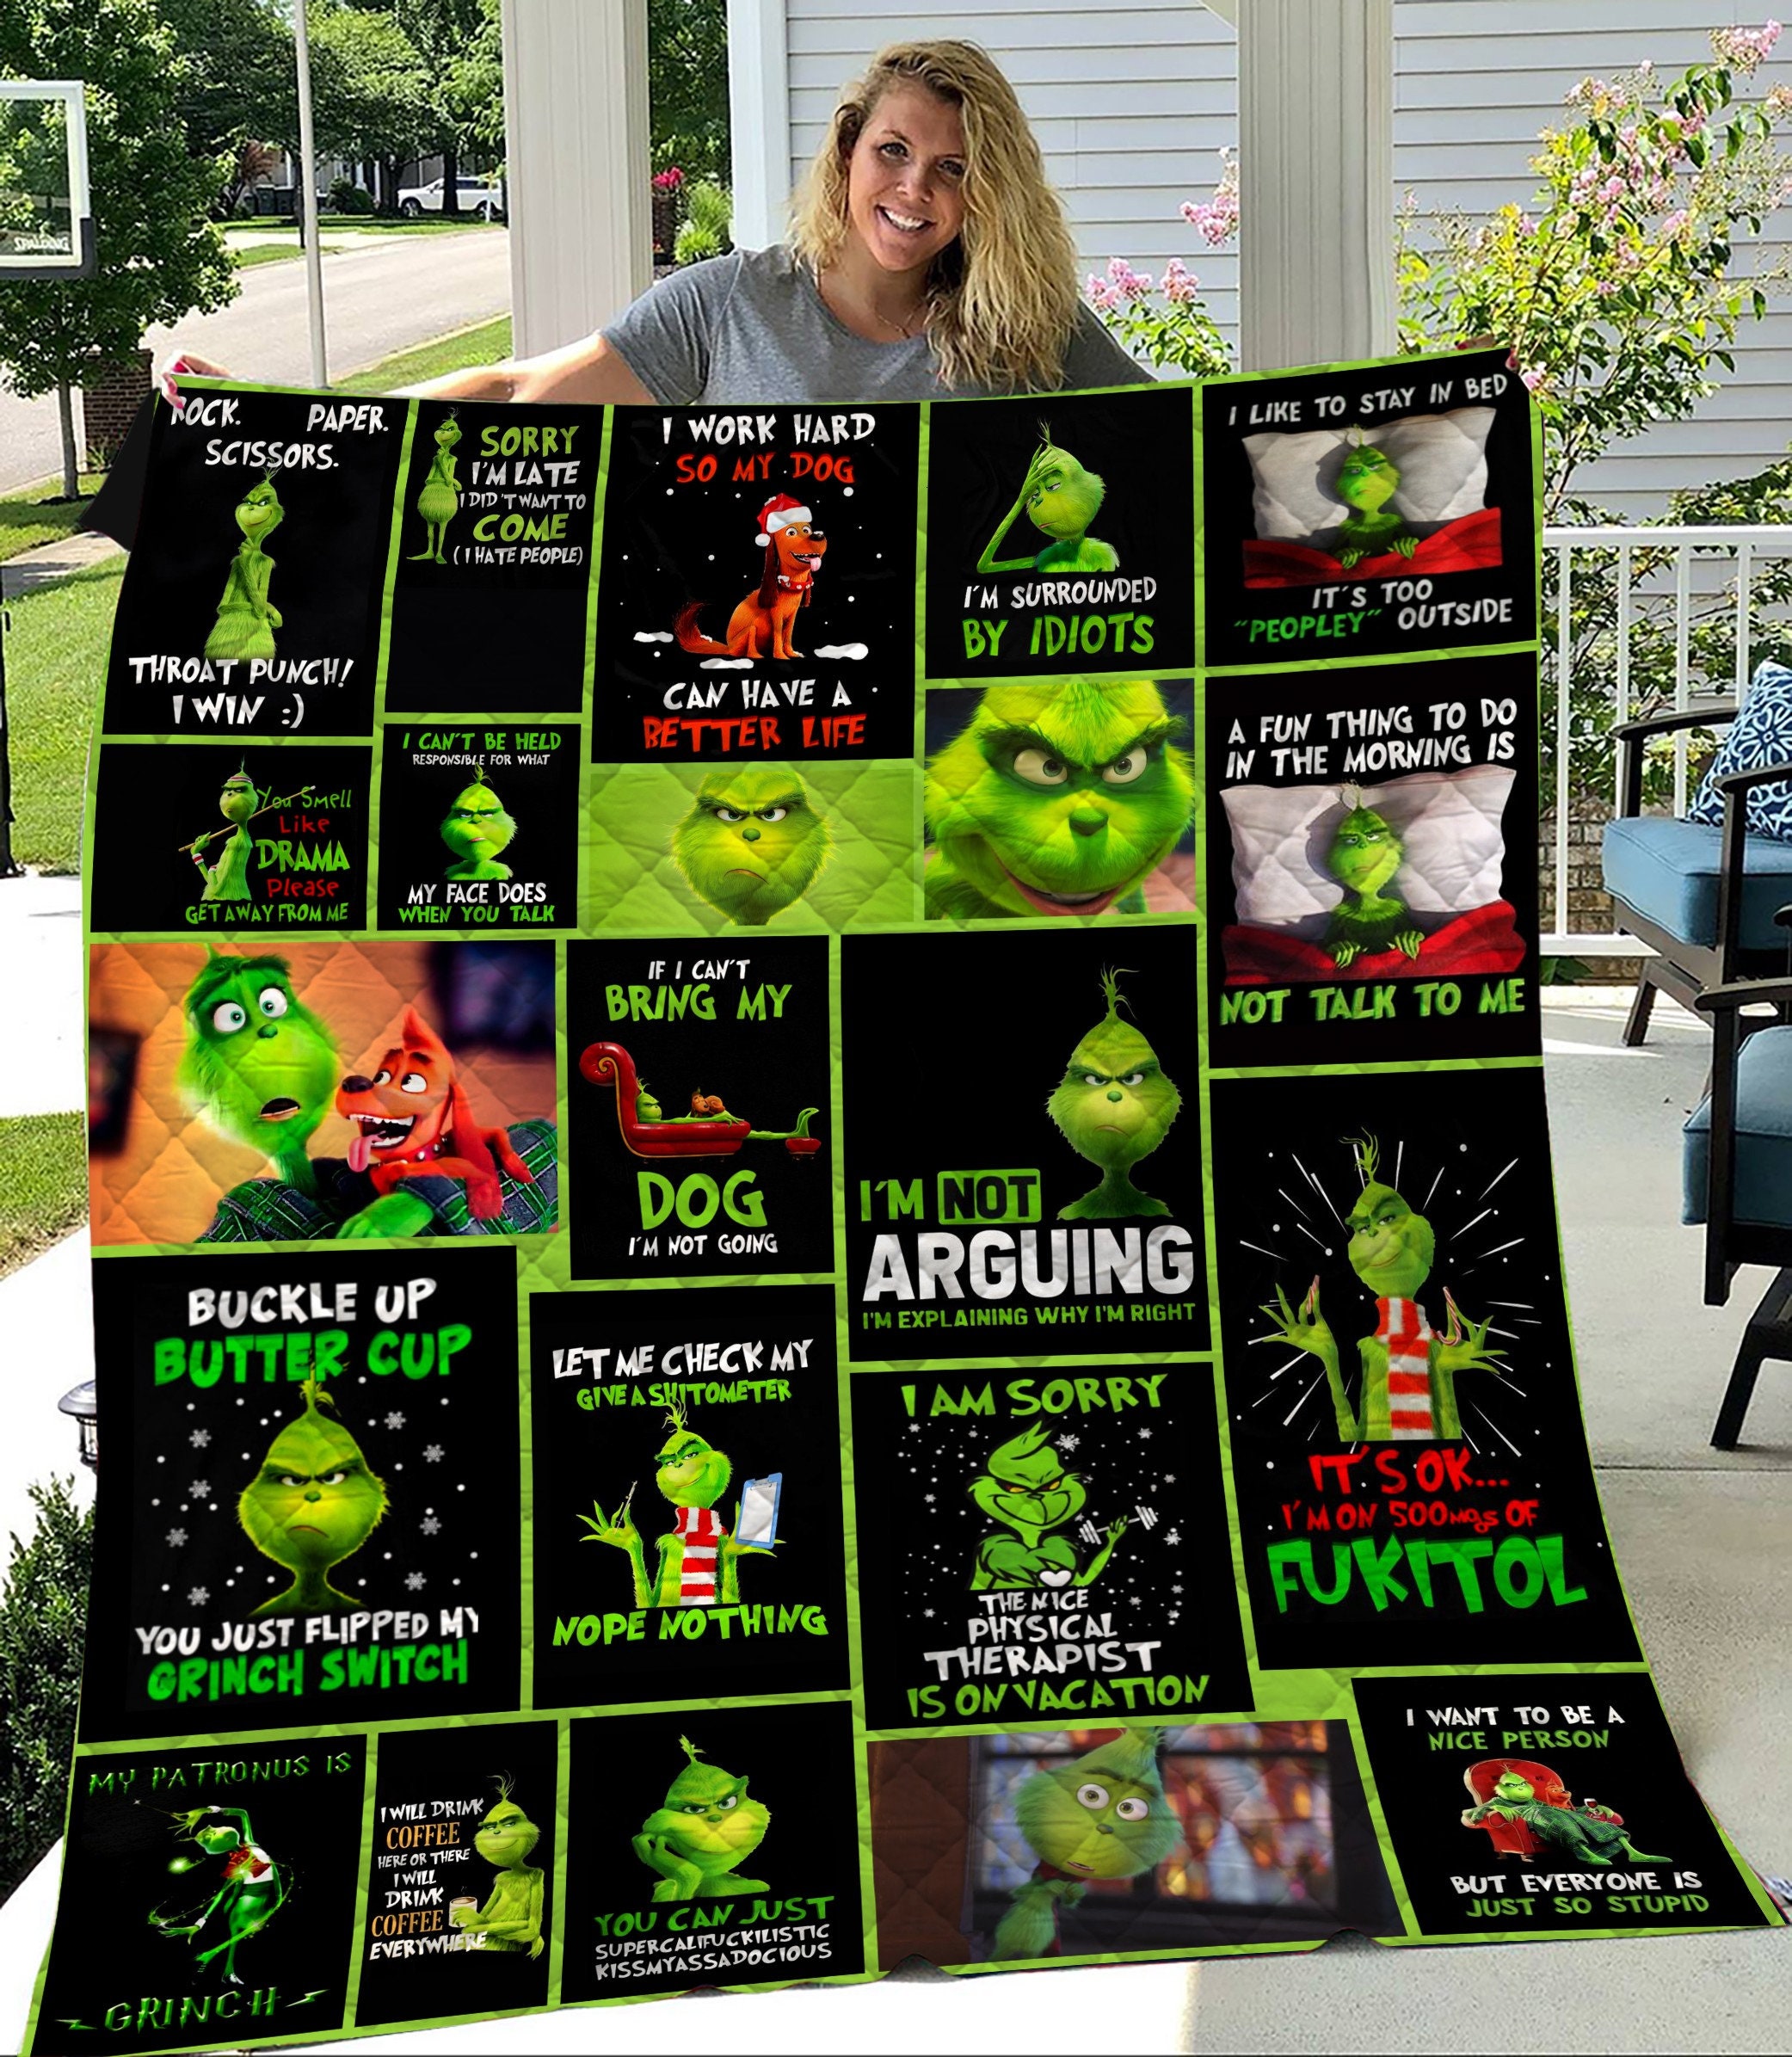 https://teeholly.com/wp-content/uploads/2021/10/is-this-jolly-enough-grinch-blanket_1634267153.jpg